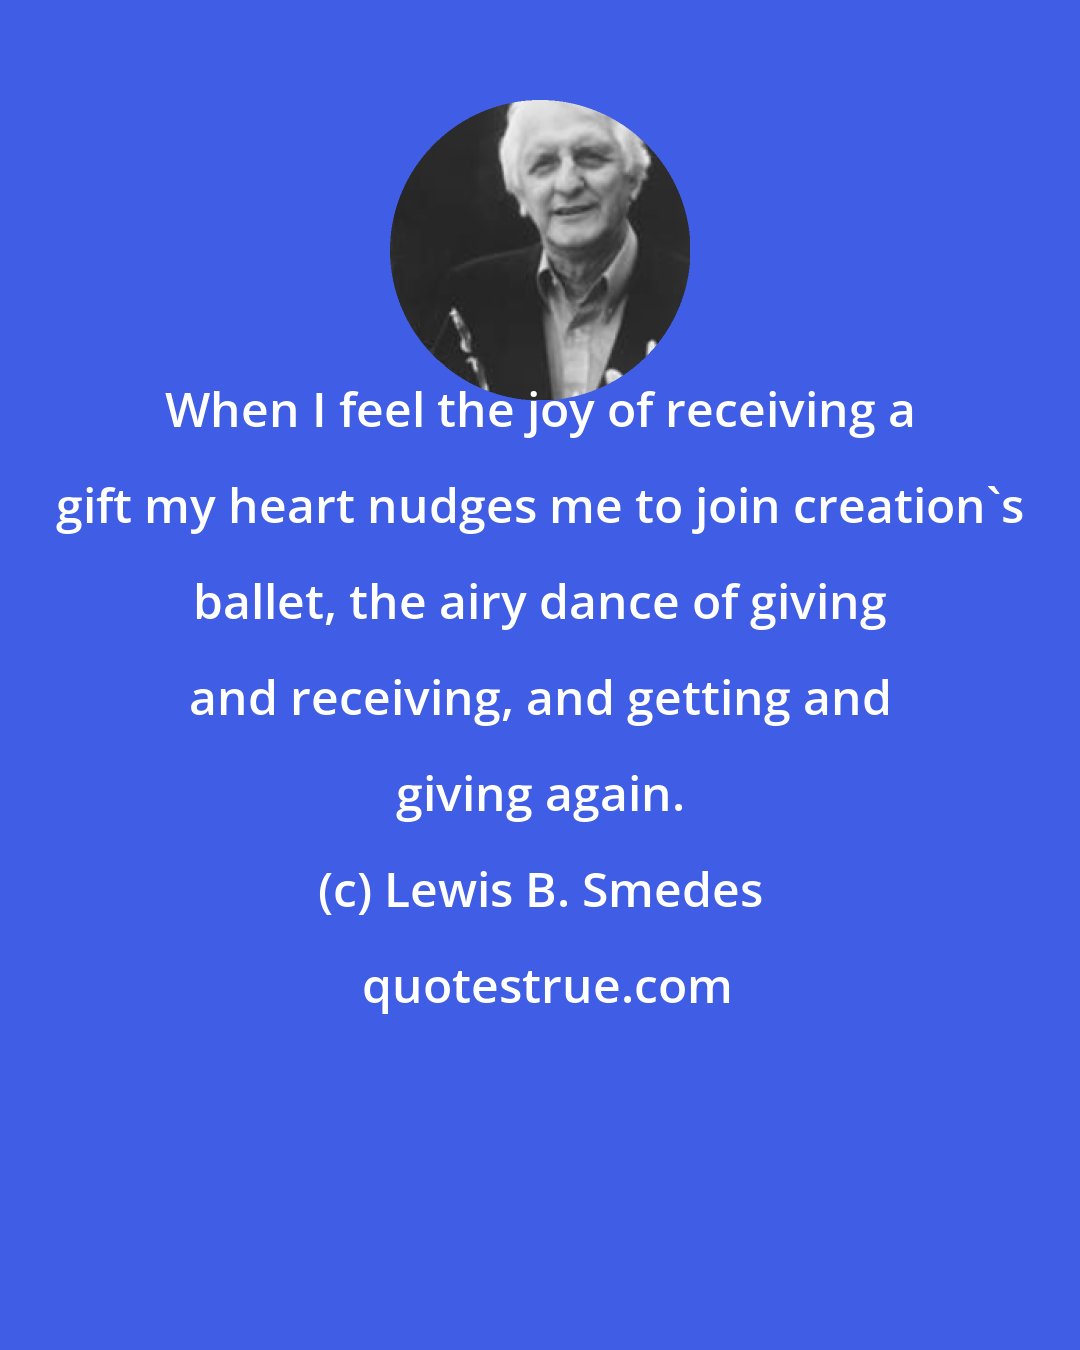 Lewis B. Smedes: When I feel the joy of receiving a gift my heart nudges me to join creation's ballet, the airy dance of giving and receiving, and getting and giving again.